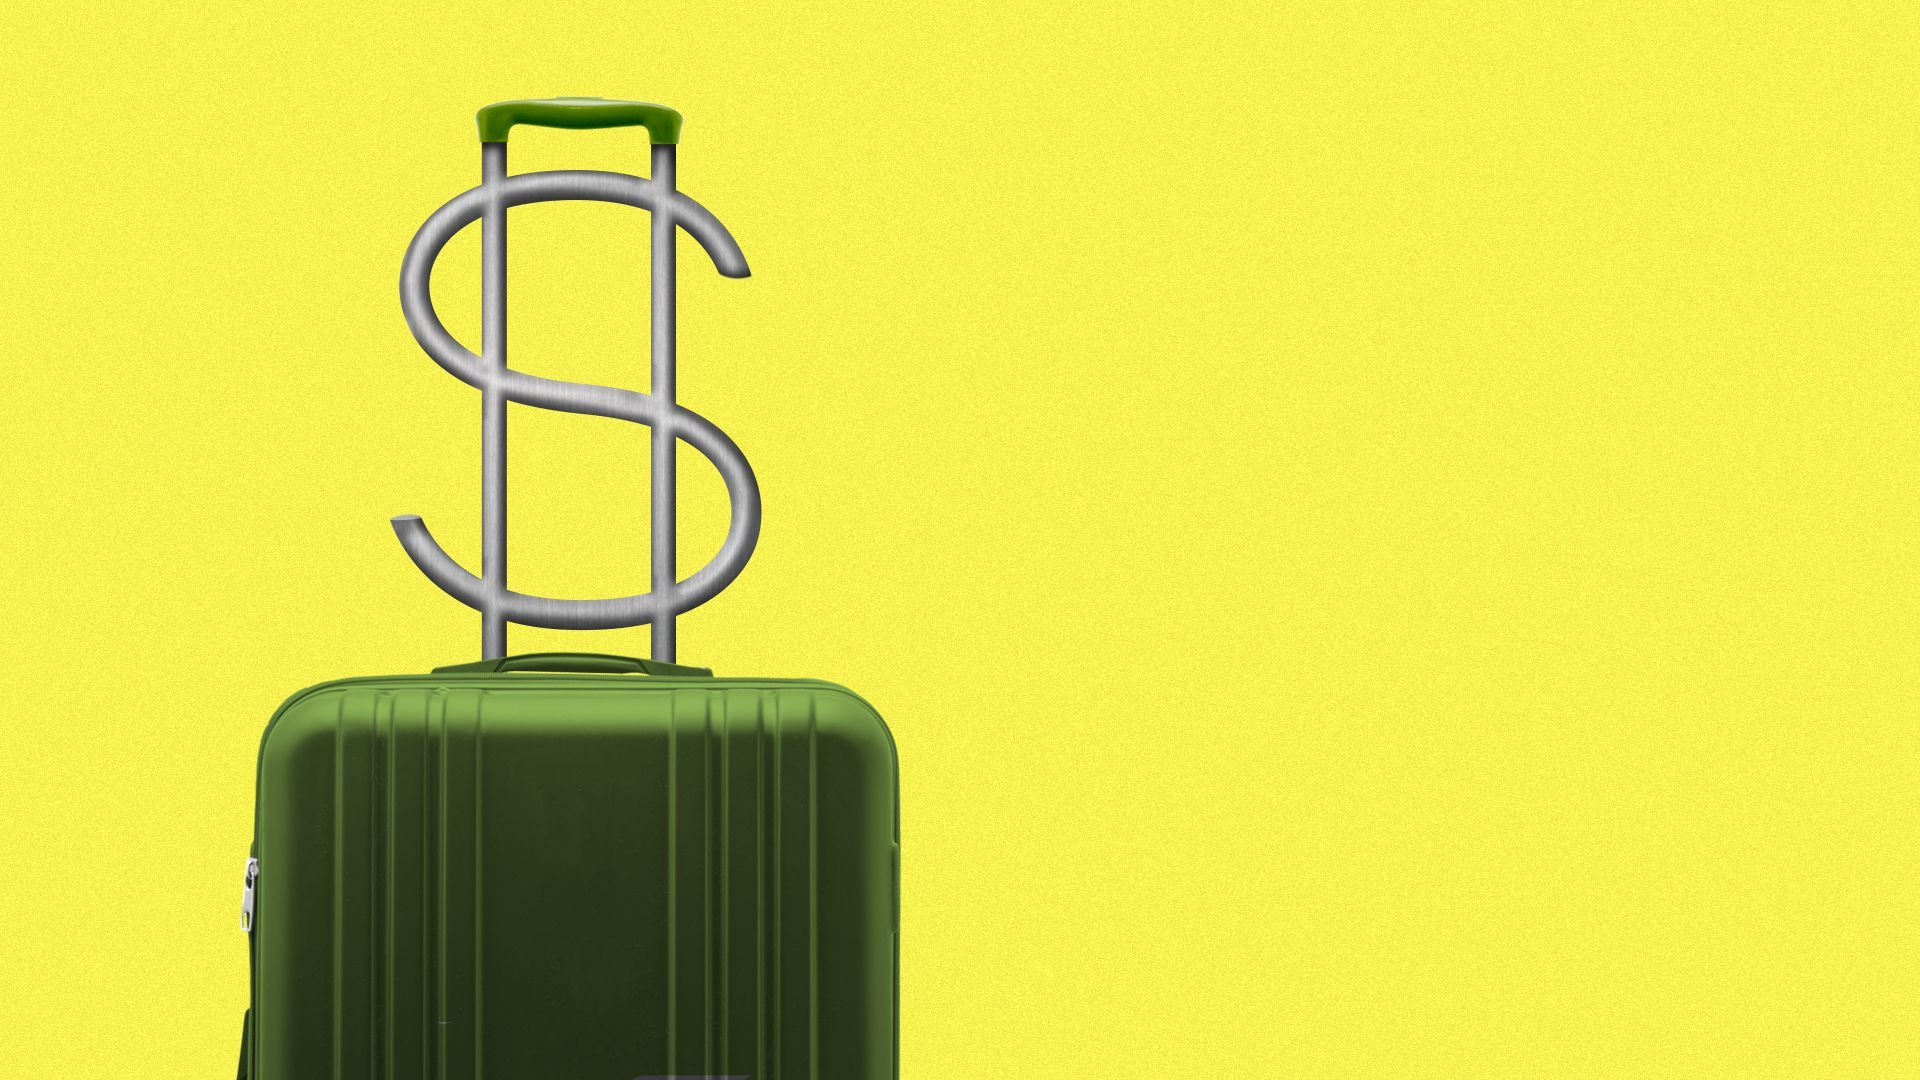 Illustration of a suitcase with a dollar sign shaped arms